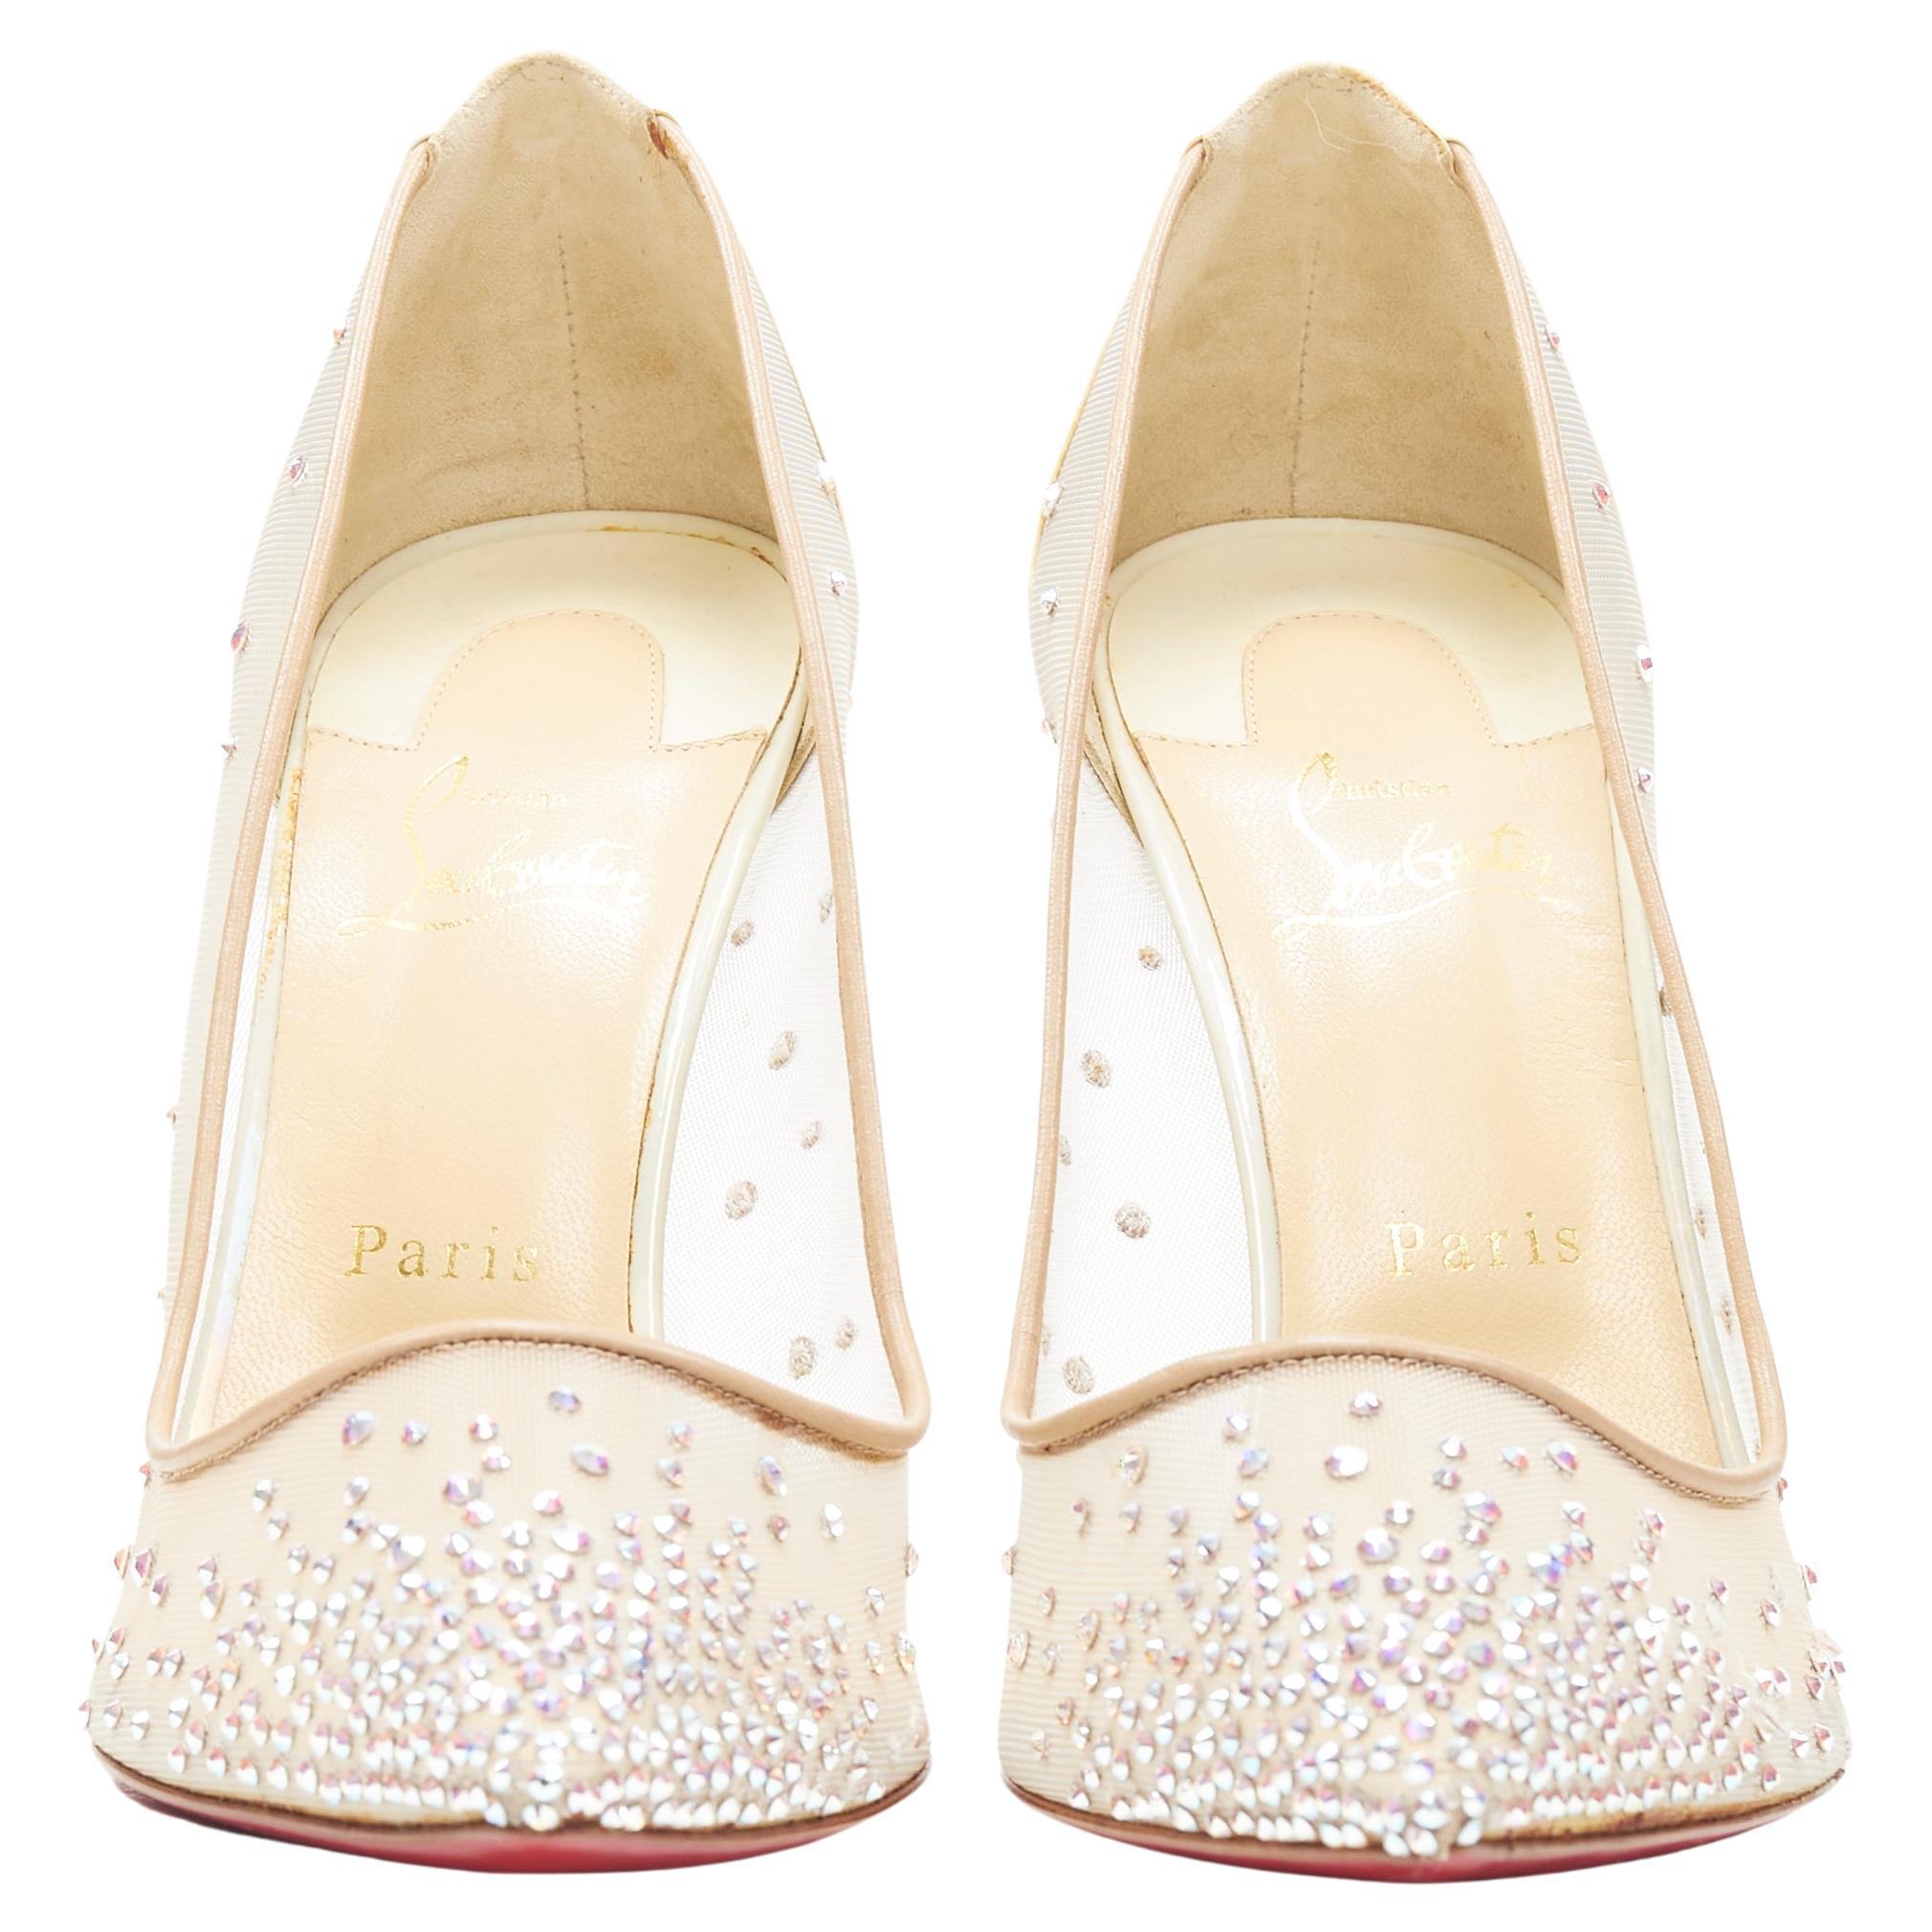 new CHRISTIAN LOUBOUTIN Follies Strass crystal mesh pearl white pump EU41
Brand: Christian Louboutin
Model: Follies Strass 100
Material: Patent Leather
Color: Beige
Pattern: Solid
Extra Detail: Follies Strass. Mesh with iridescent crystal